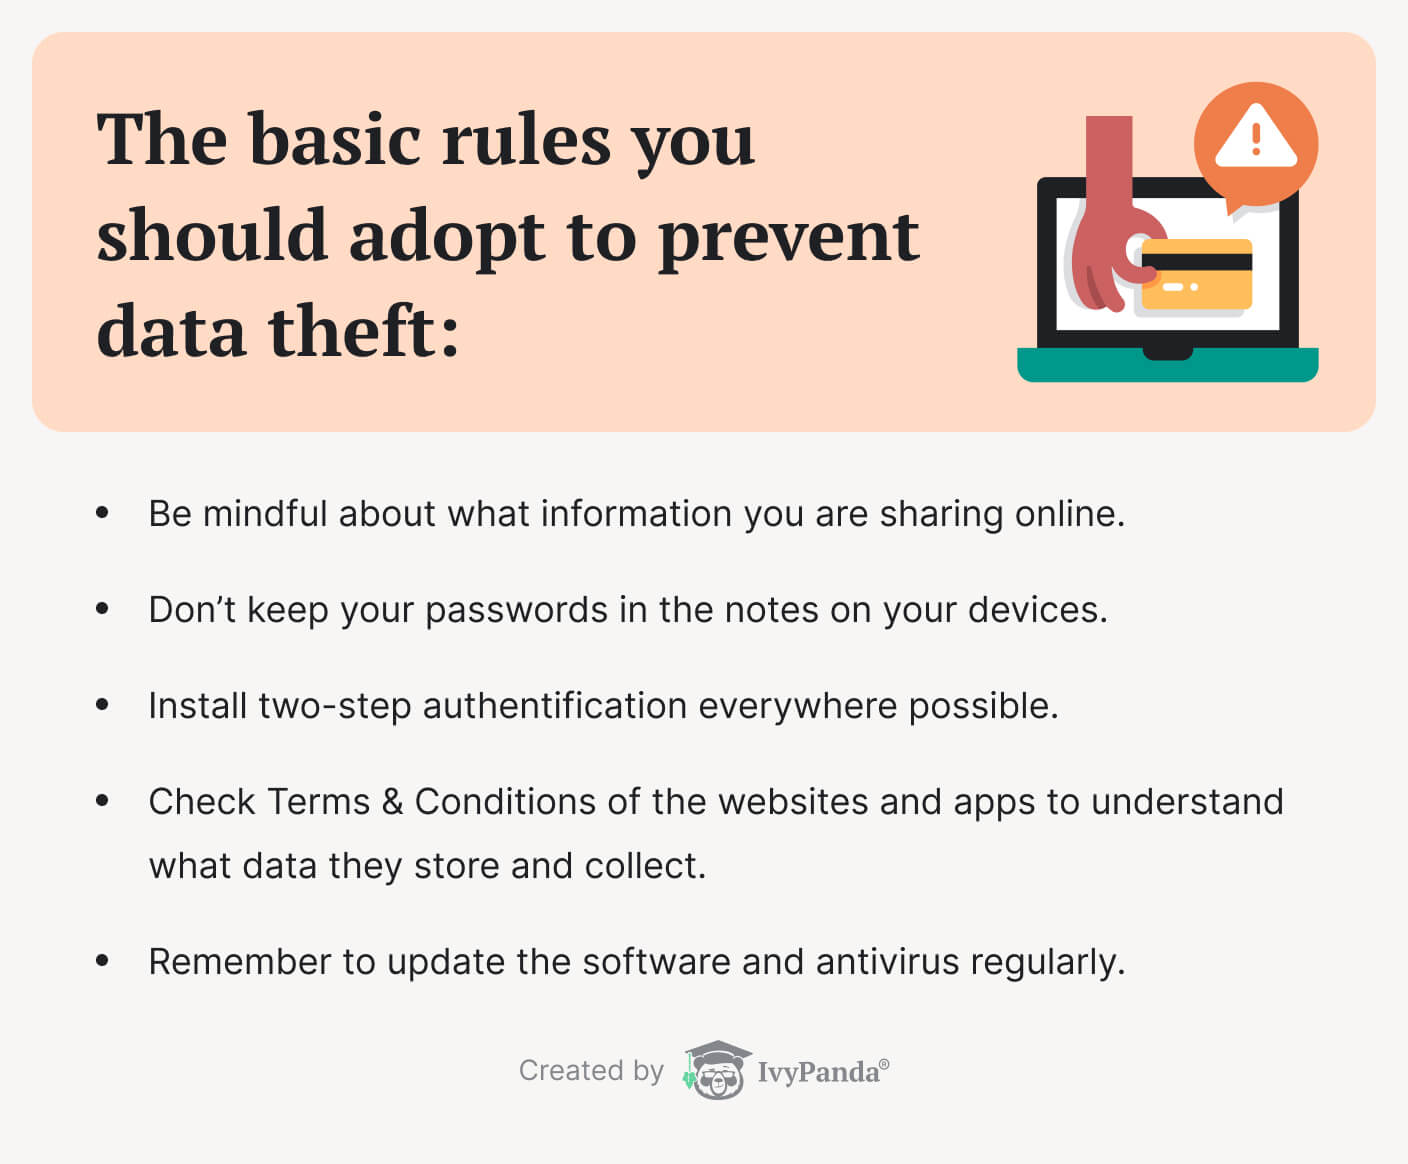 Tips on preventing data theft.